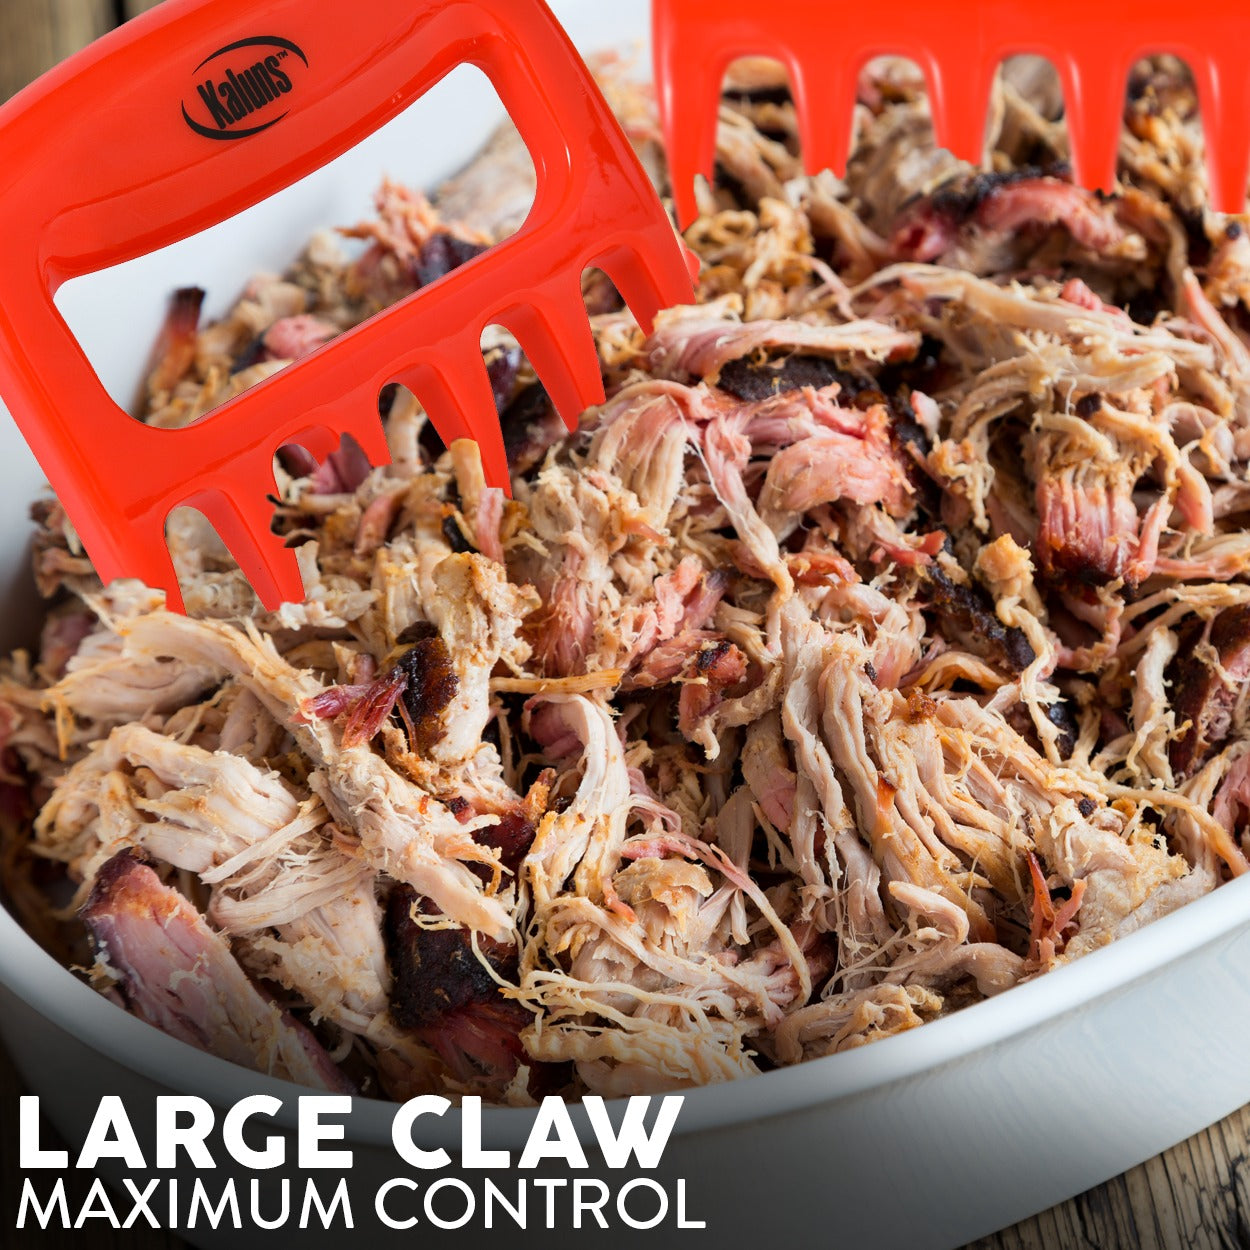 Meat Claws™